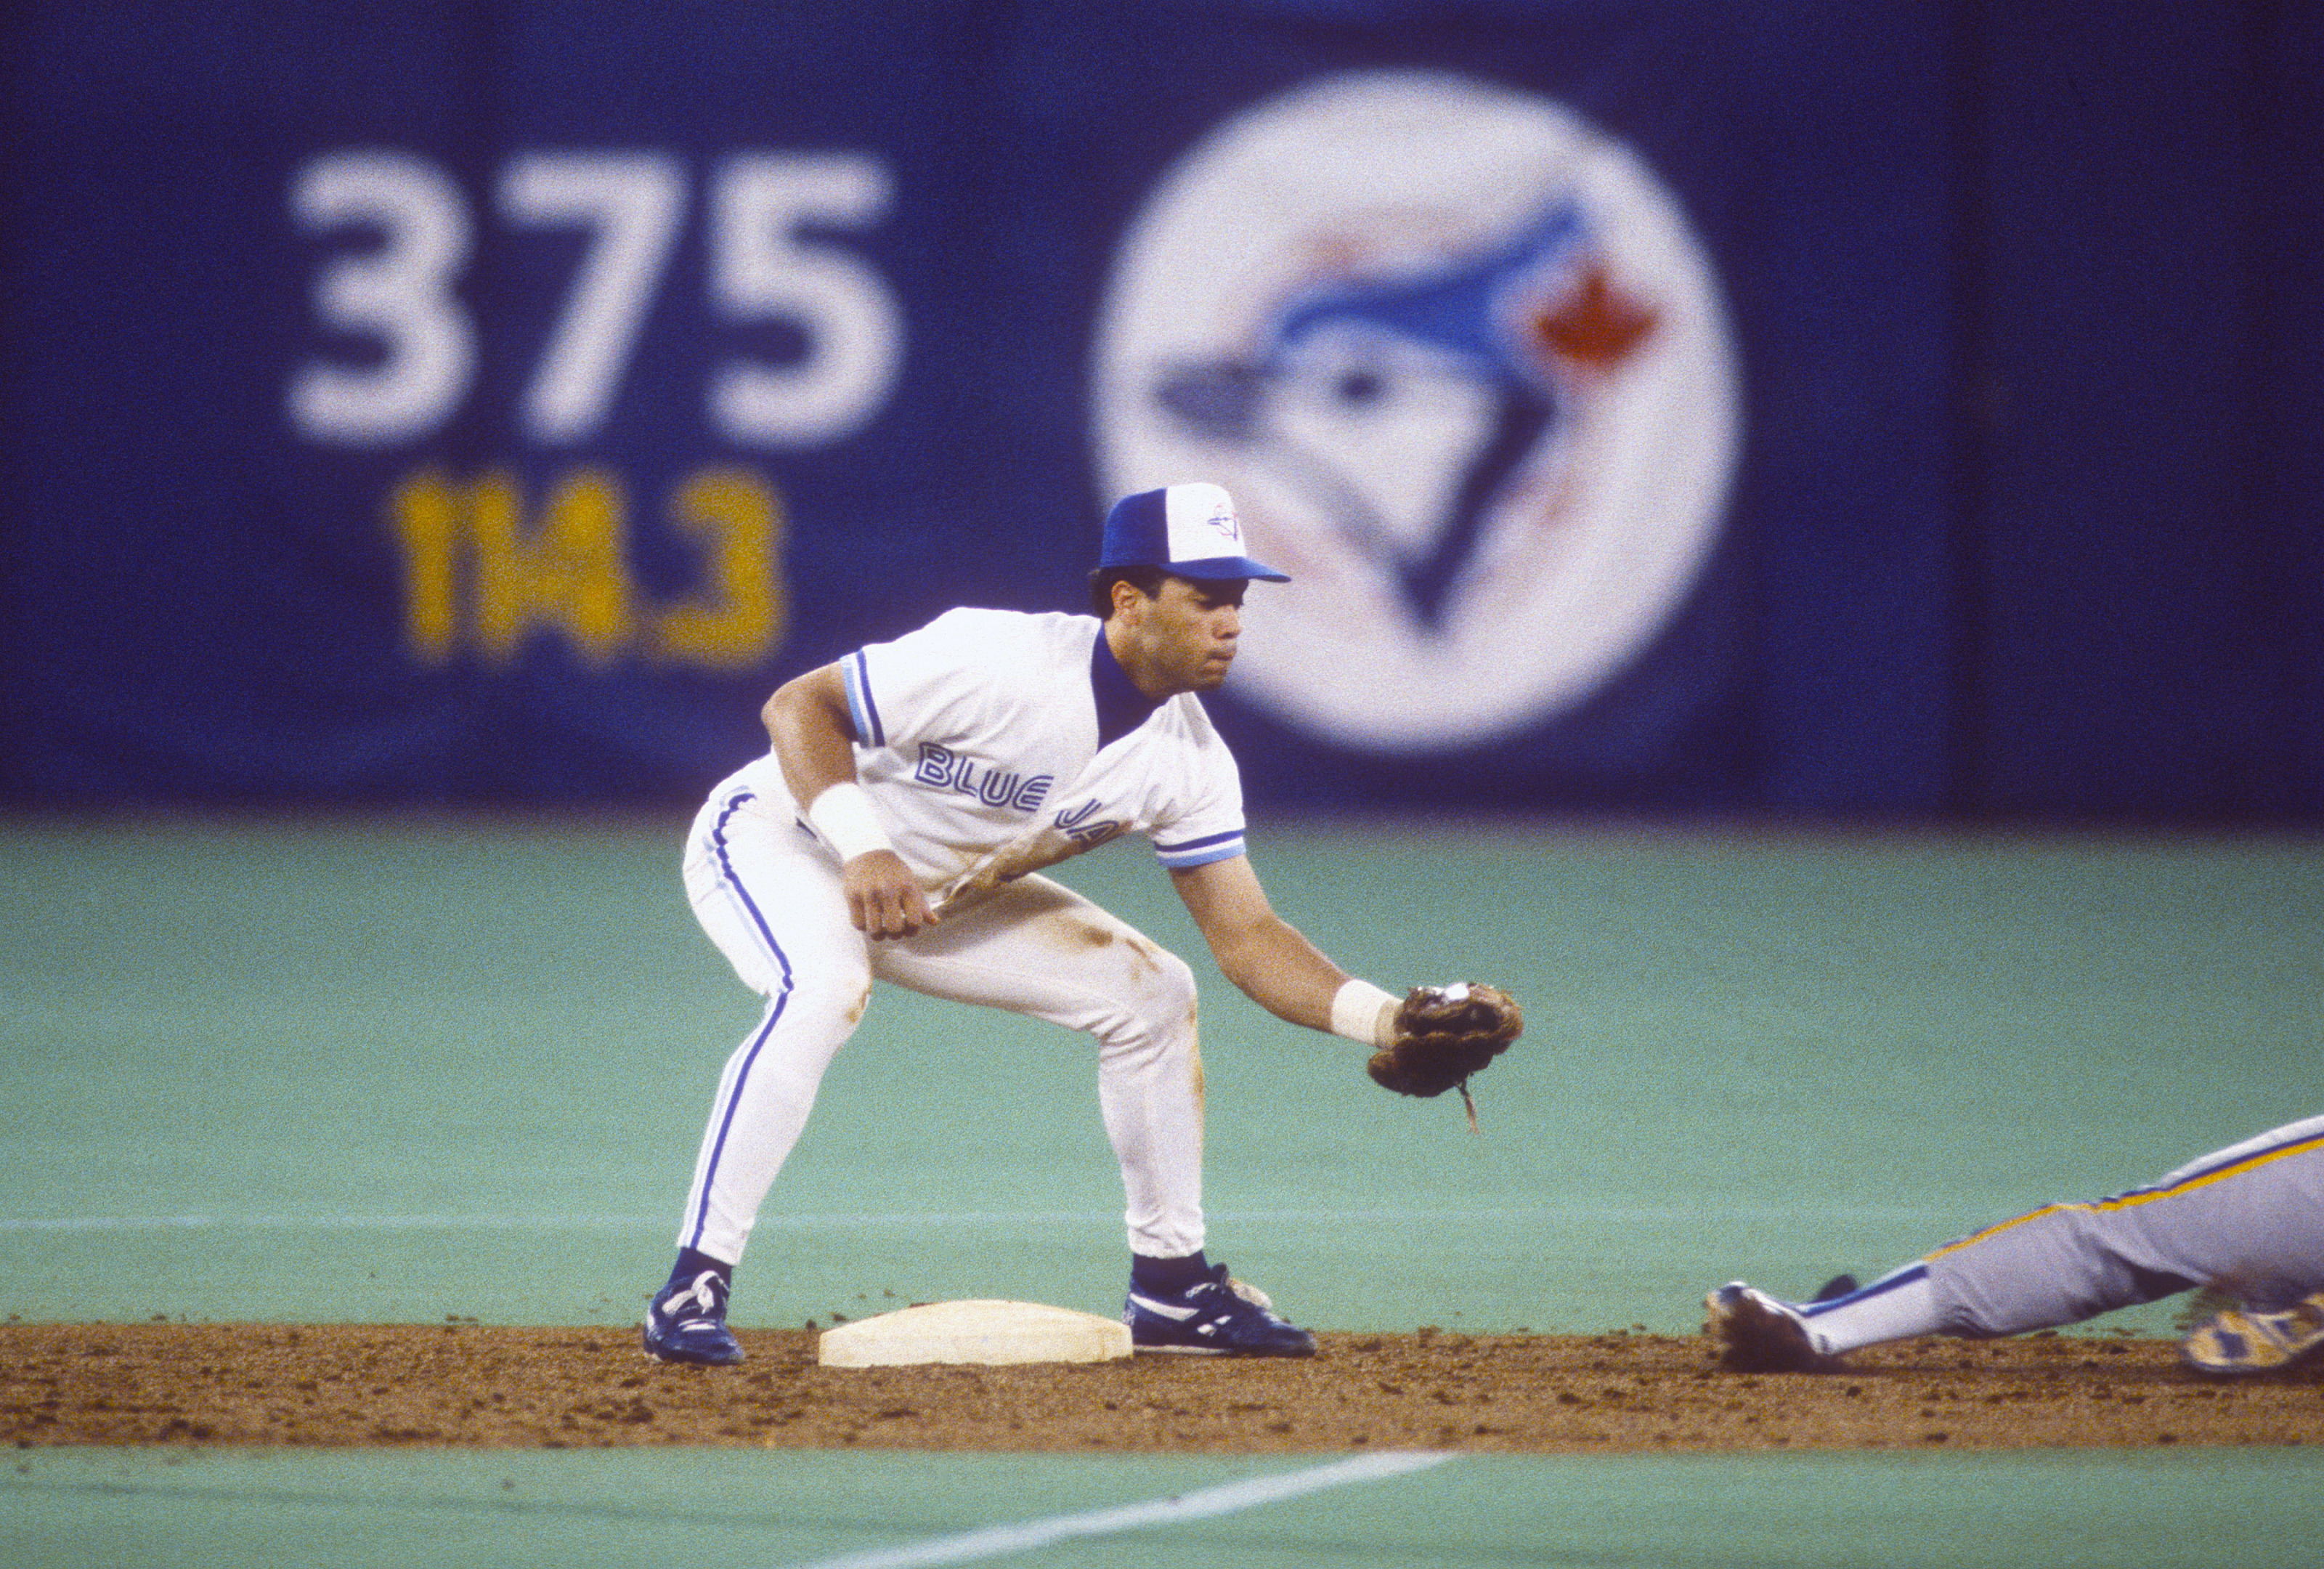 Alomar not part of Blue Jays' 30th anniversary of 92' World Series